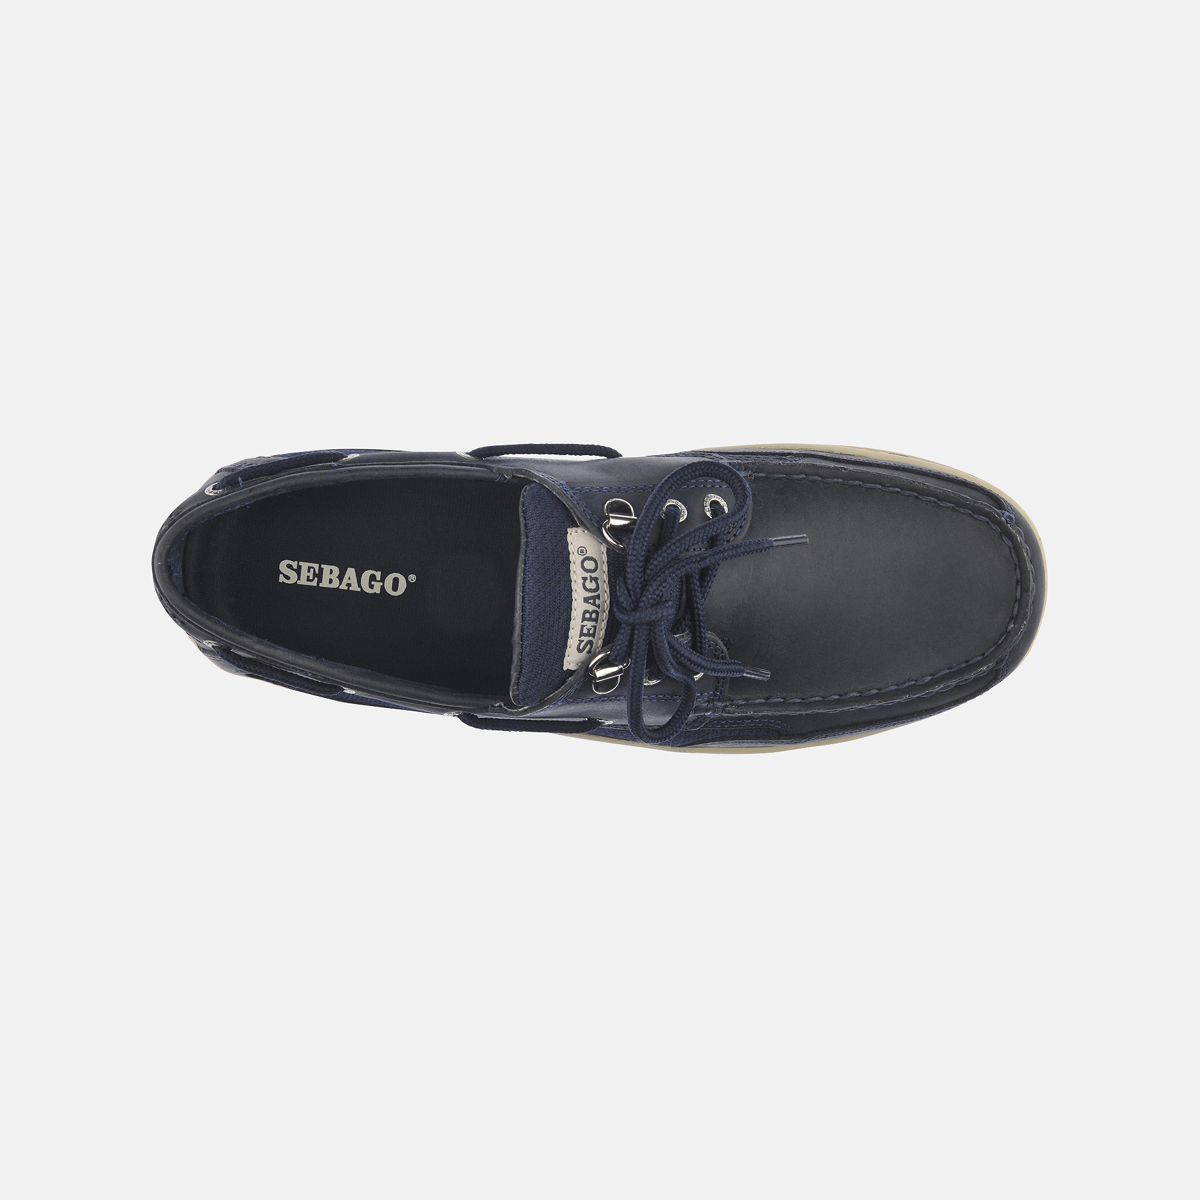 Sebago Clovehitch II chaussures bateau homme blue navy leather, taille 42 (US 8.5)